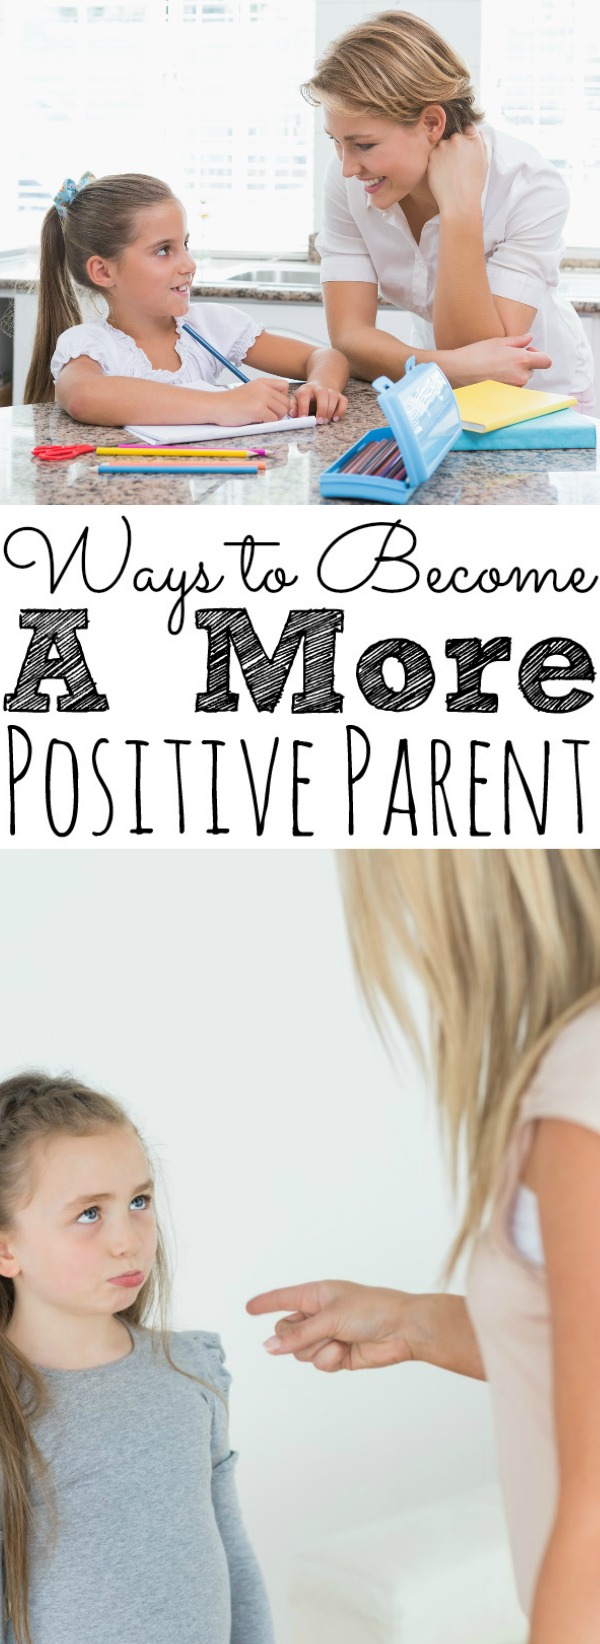 How To Become A More Positive Parent